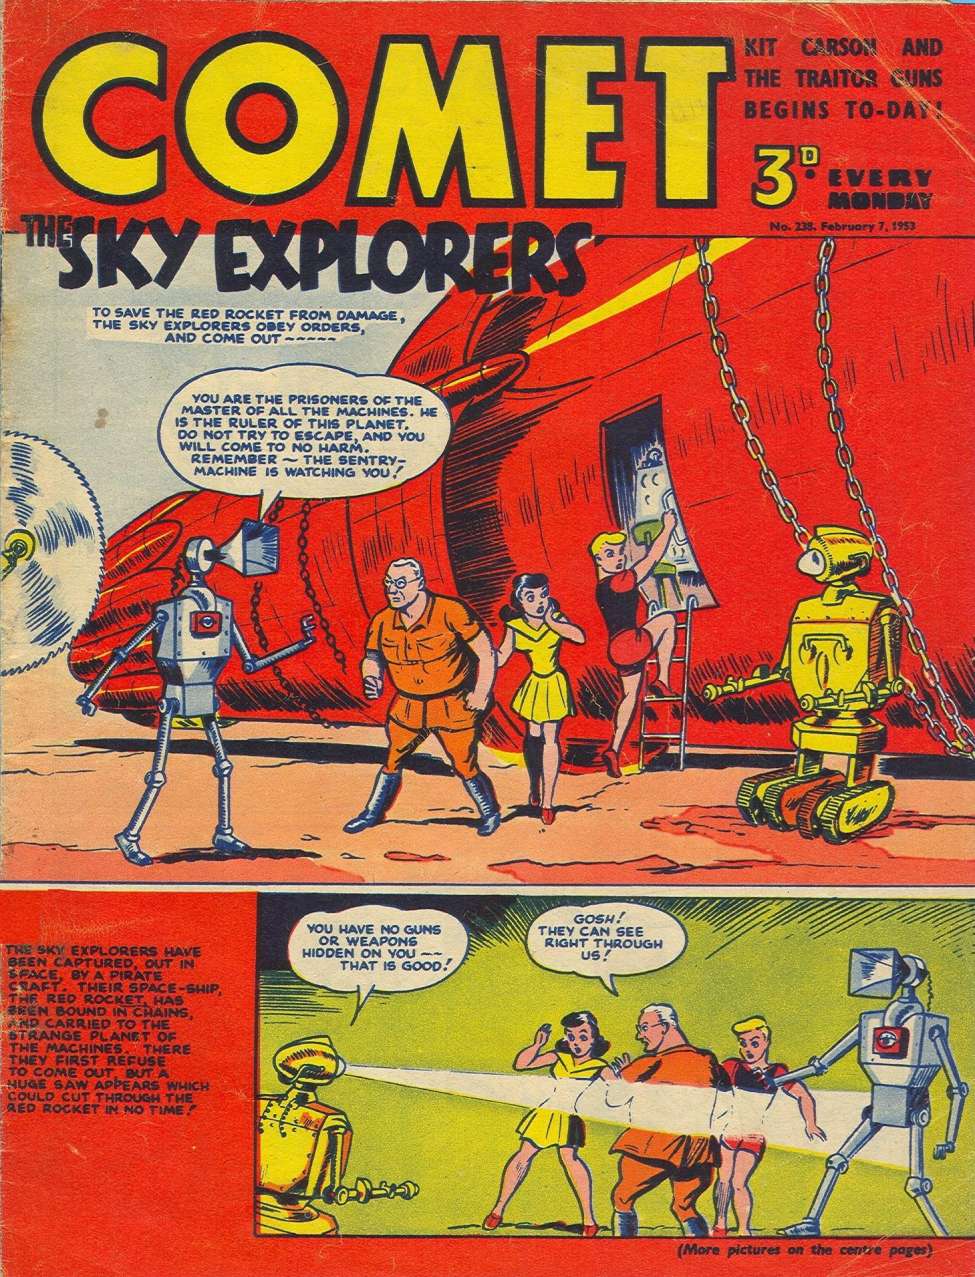 Book Cover For The Comet 238